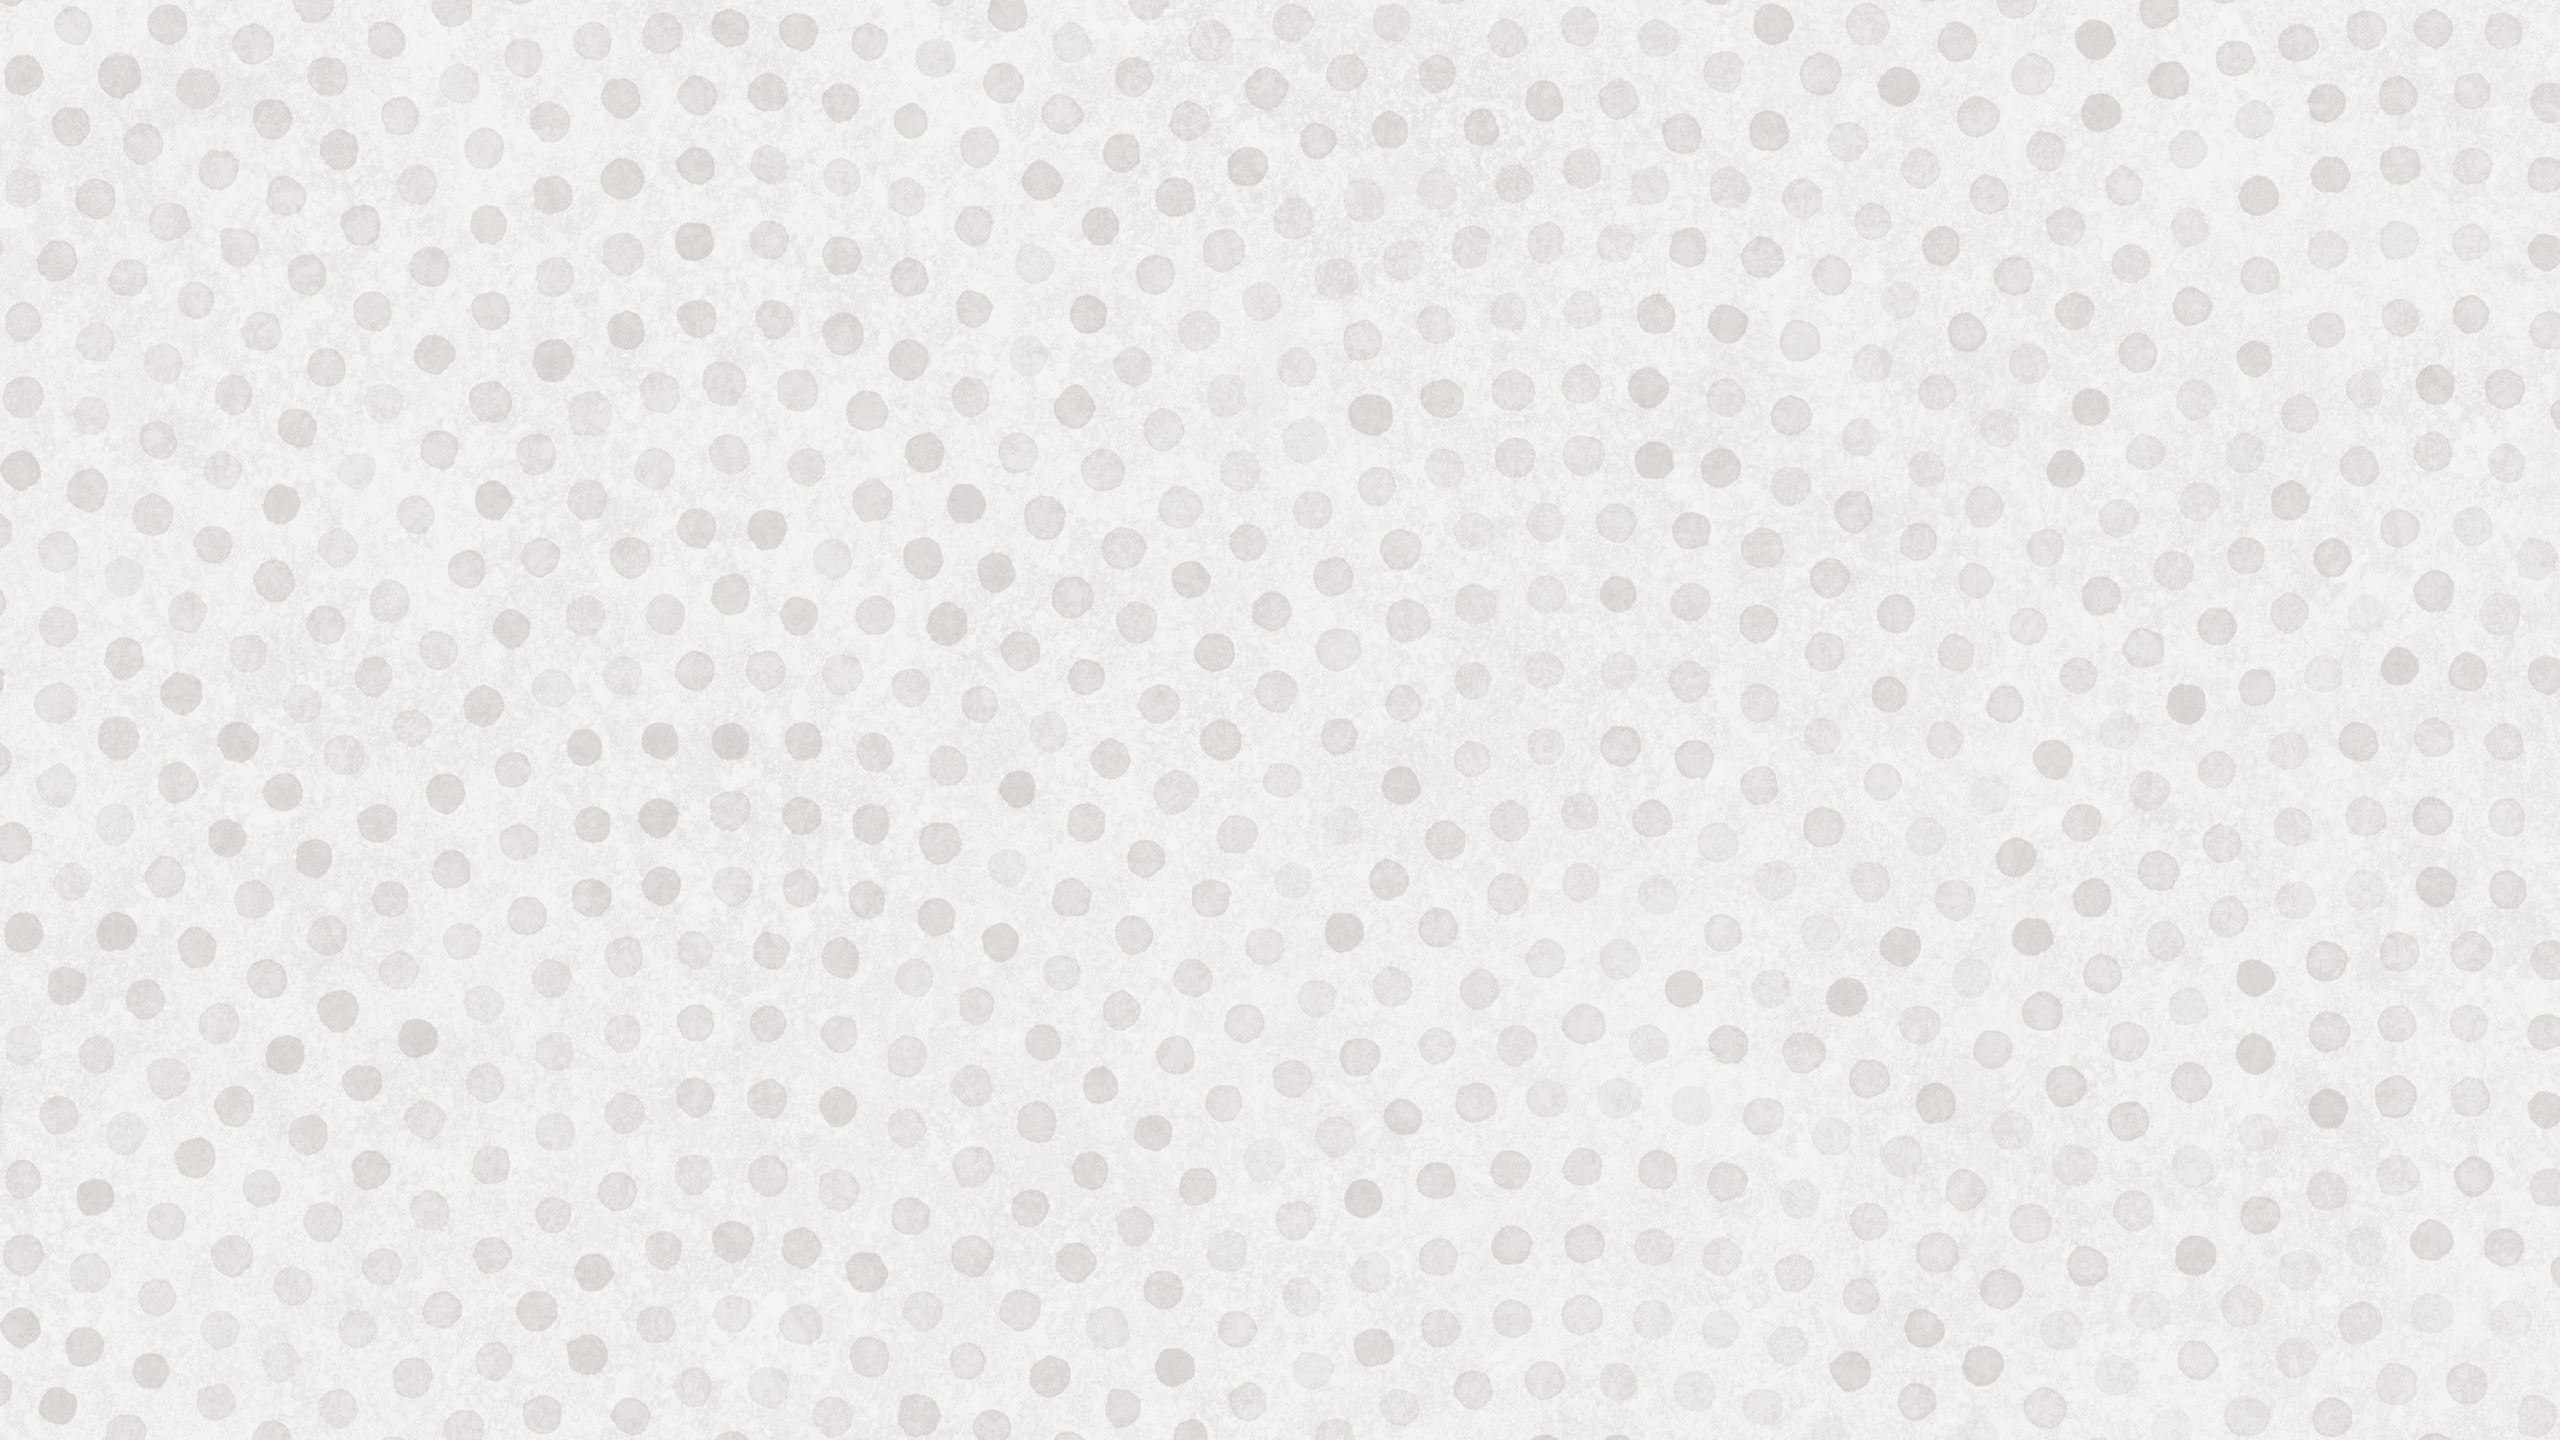 White and Black Polka Dot Textile. Wallpaper in 2560x1440 Resolution